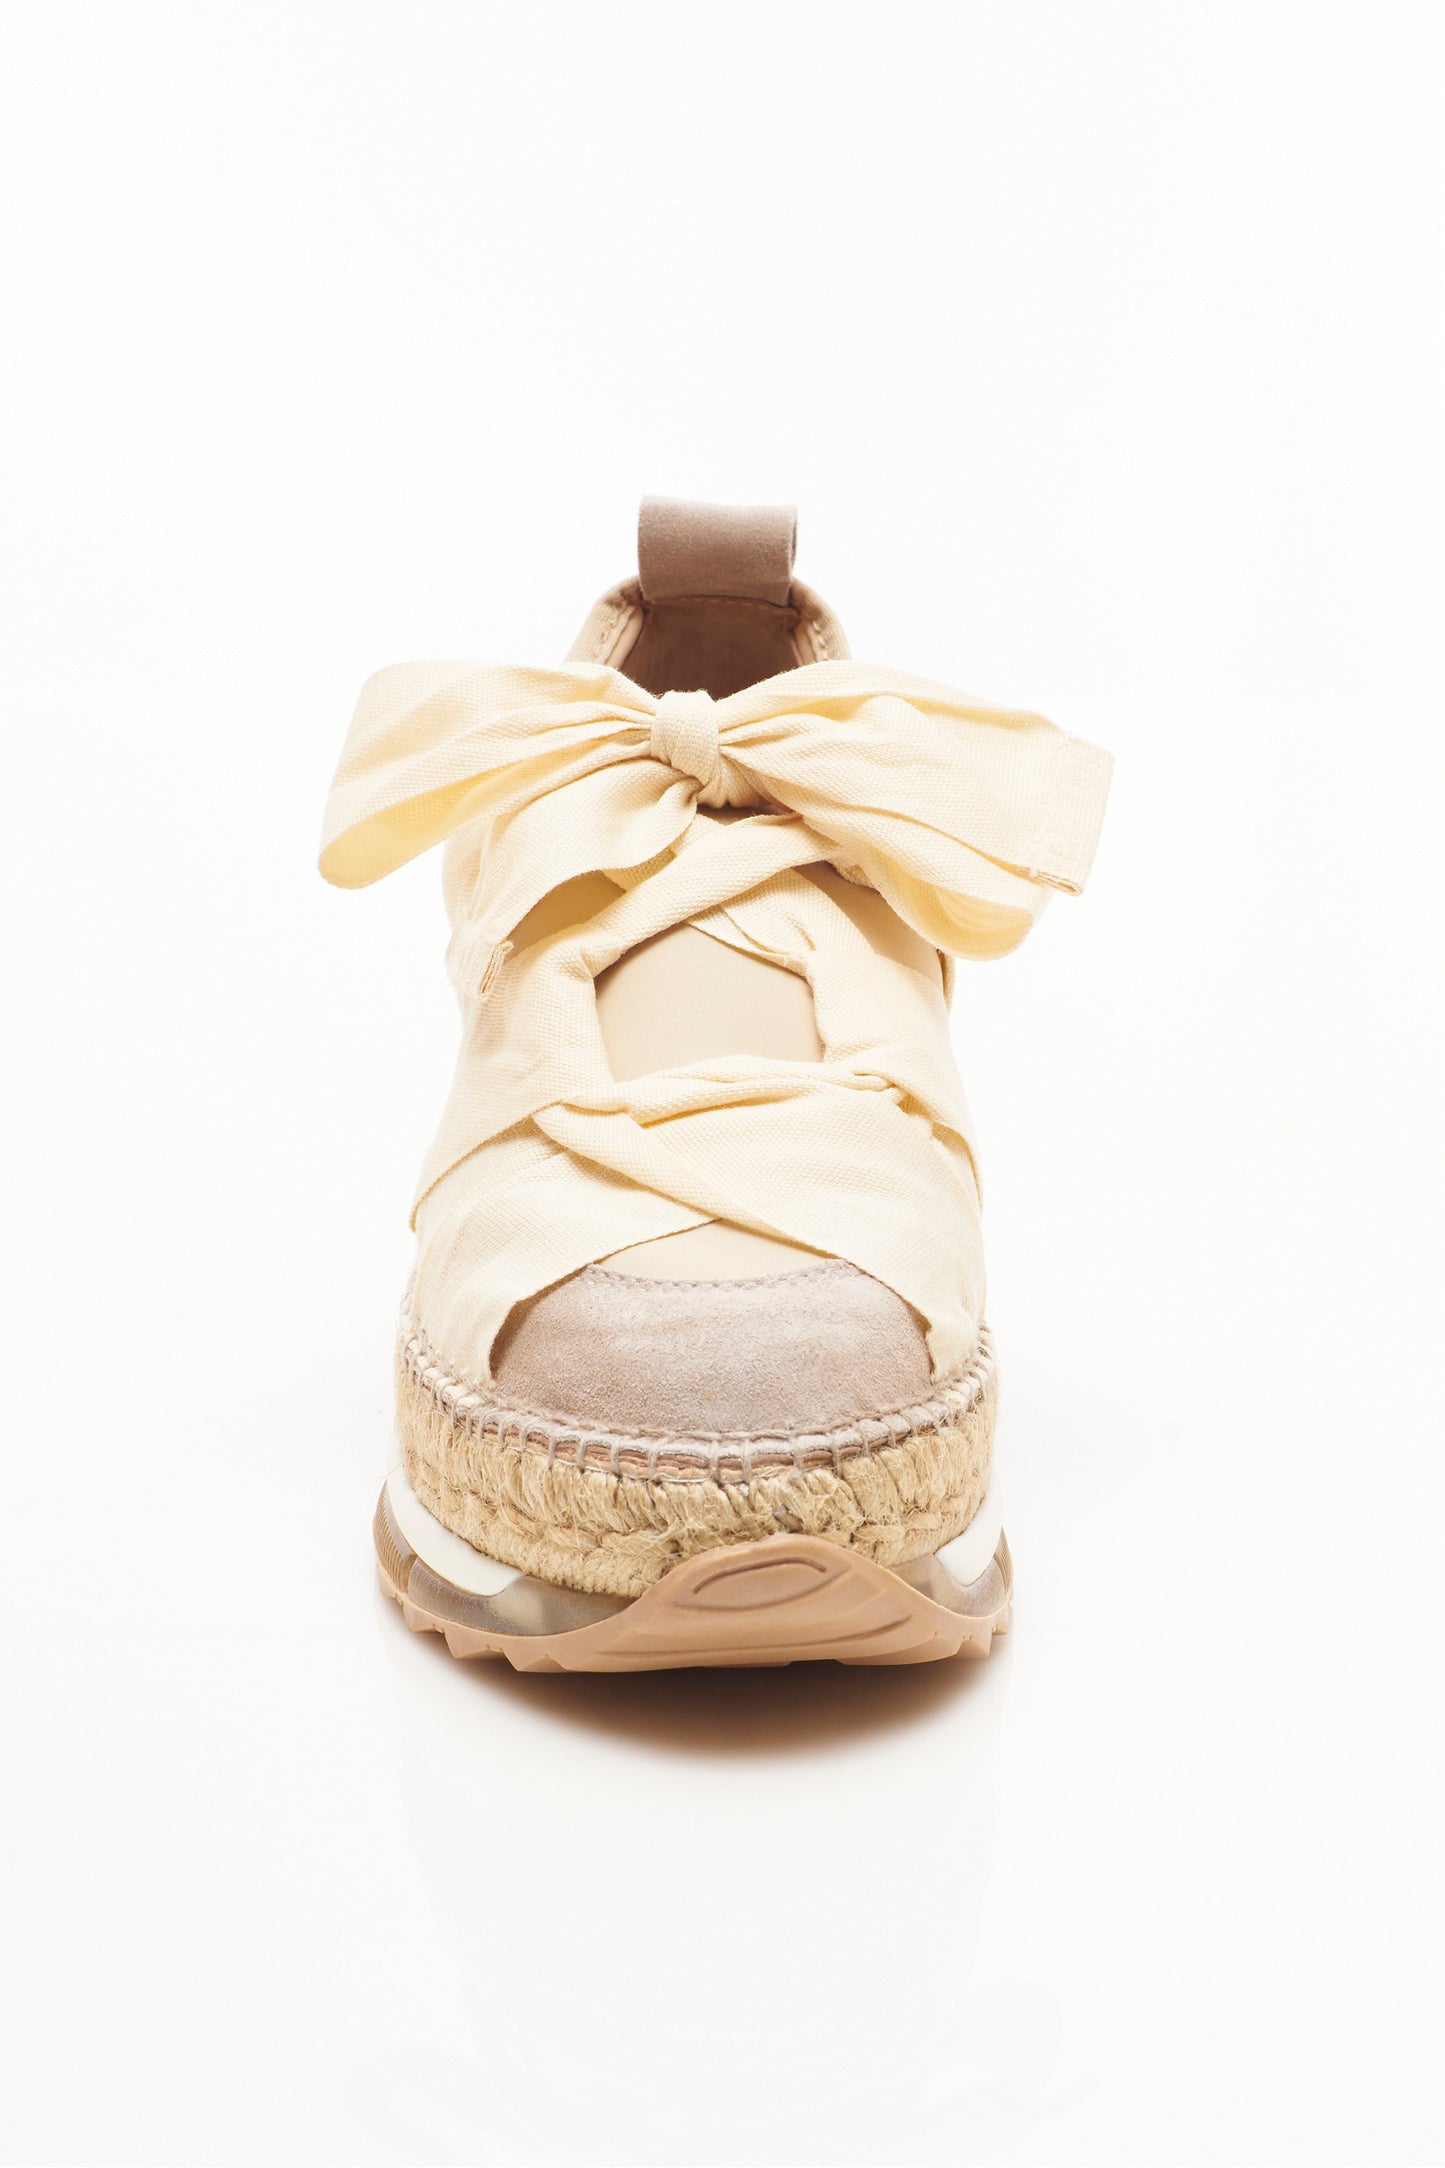 Free People Chapmin Espadrille Sneakers - Ivory